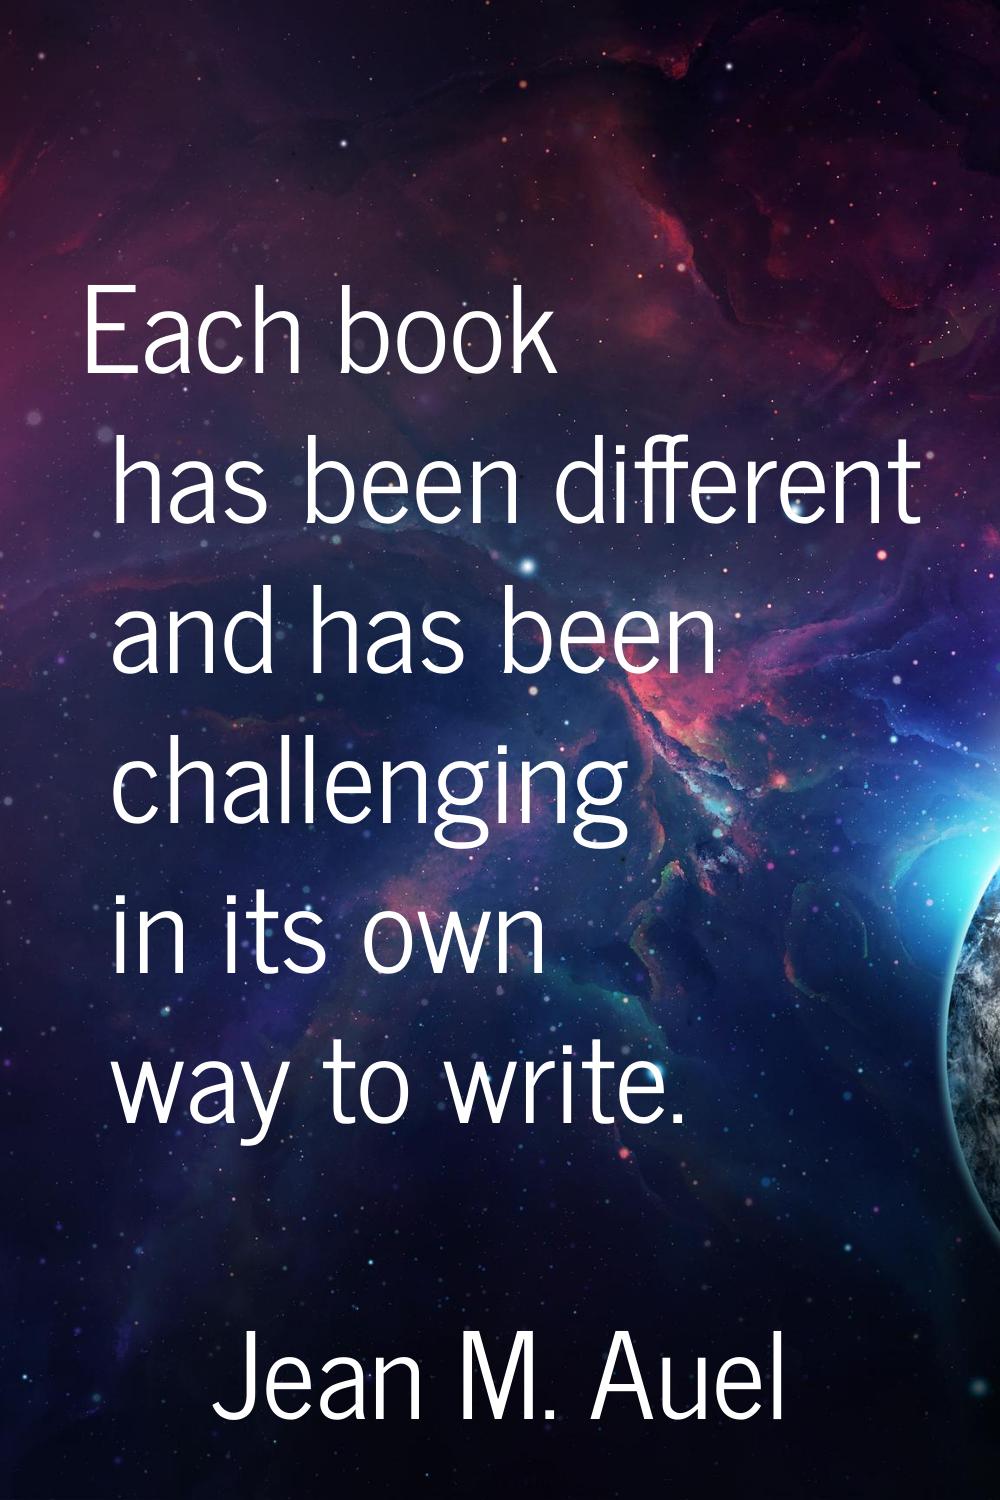 Each book has been different and has been challenging in its own way to write.